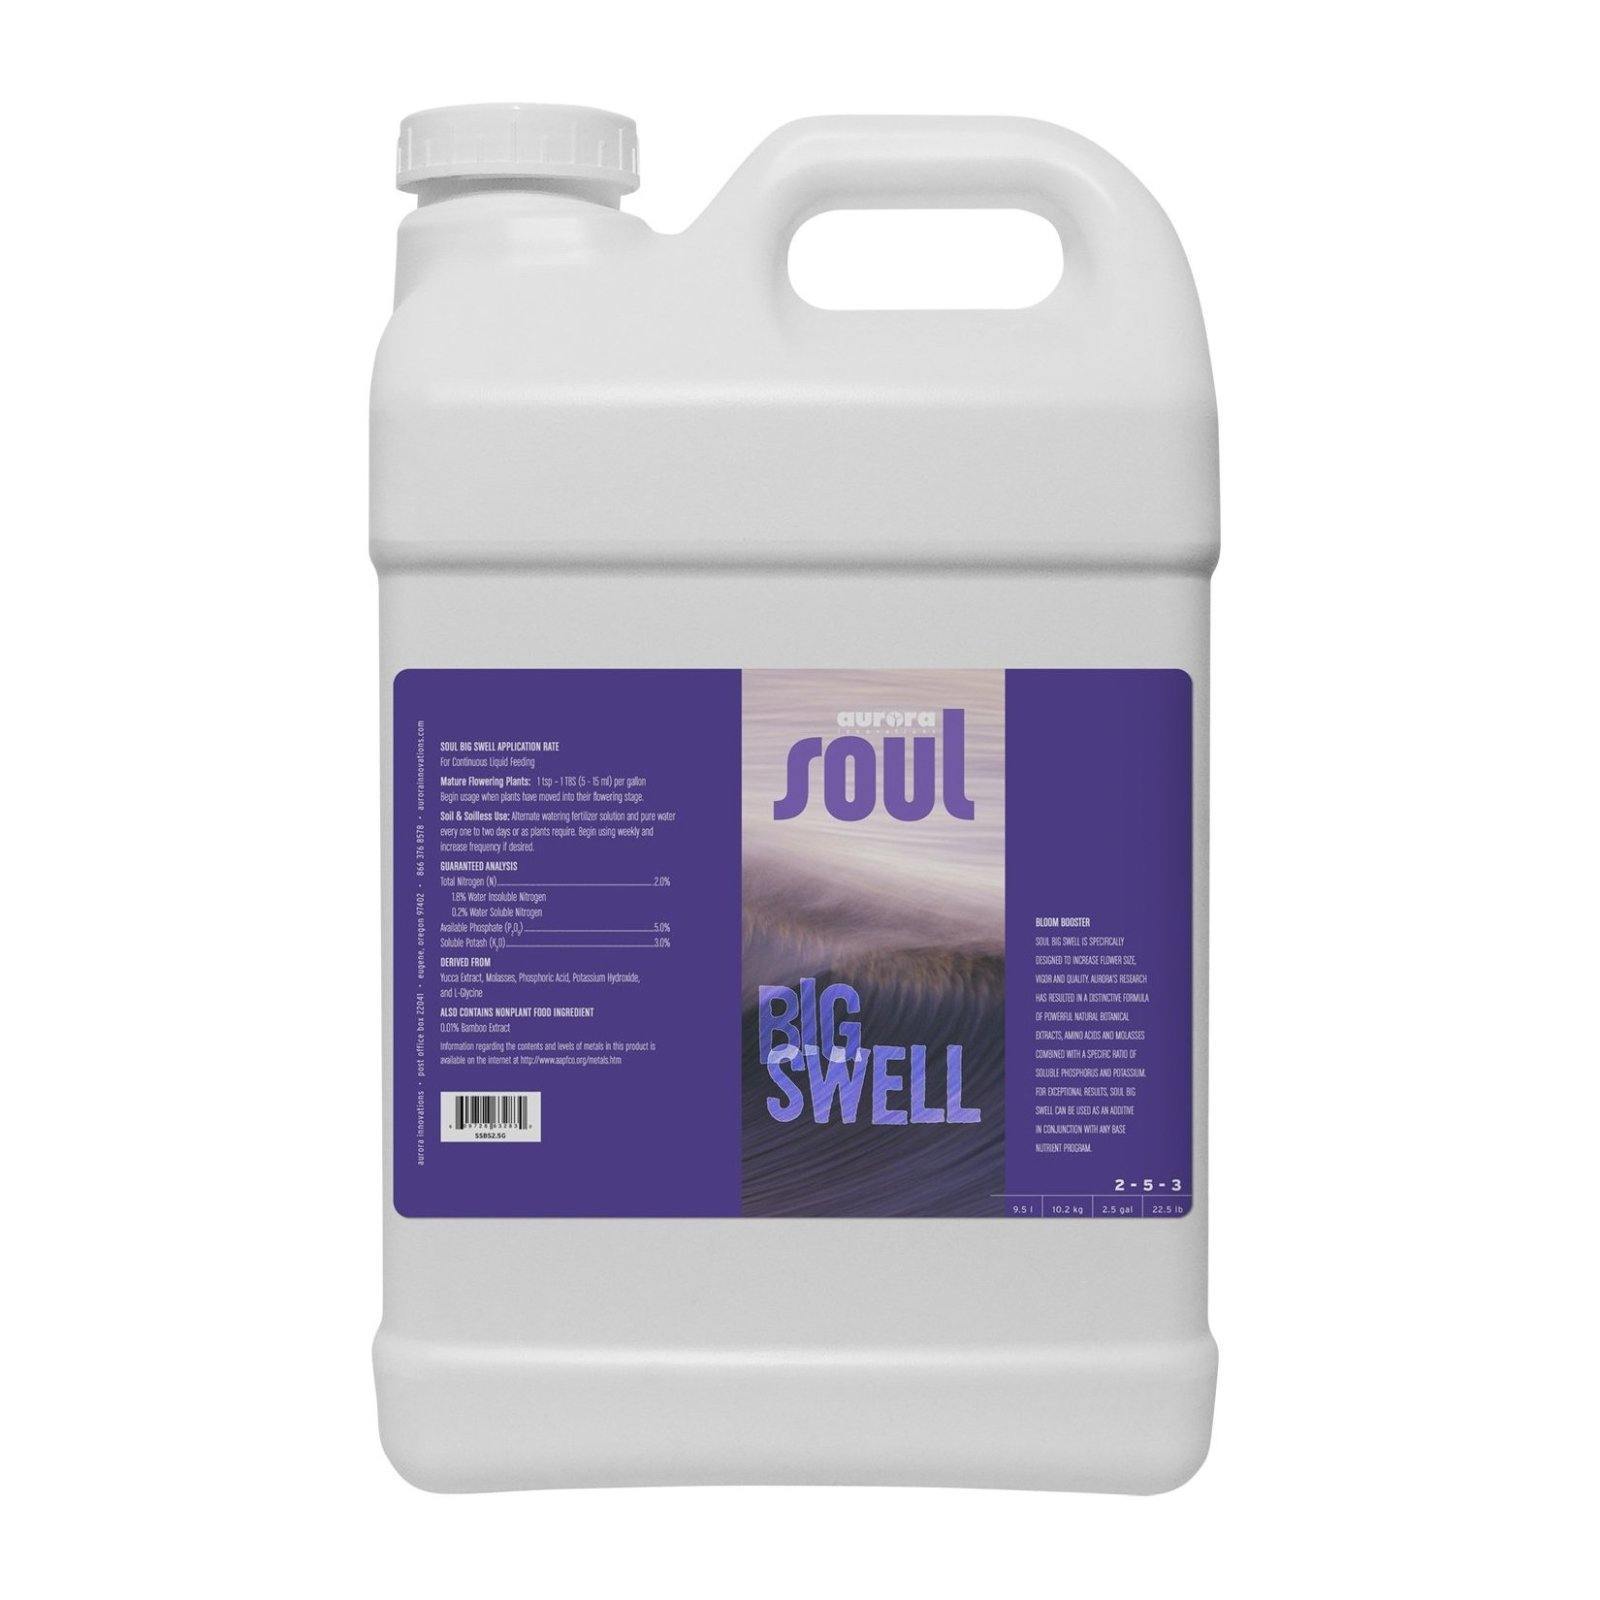 Nutrients, Additives & Solutions - Soul Big Swell - 609728632823- Gardin Warehouse